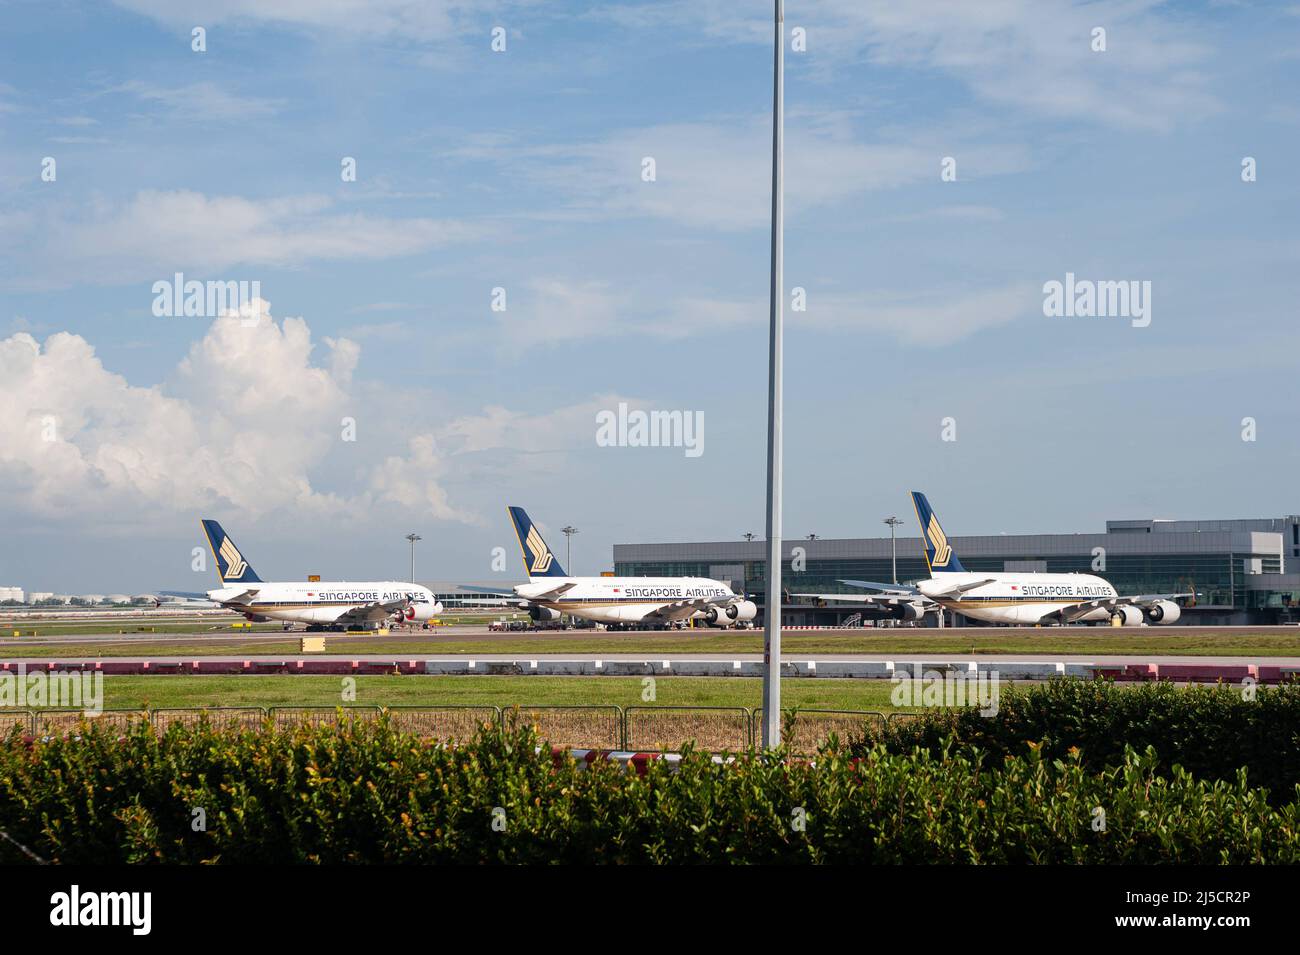 Aug. 28, 2020, Singapore, Republic of Singapore, Asia - Temporarily grounded Airbus A380 passenger aircraft operated by state-owned Singapore Airlines (SIA) park at Terminal 4 at Changi Airport. Due to the global spread of the coronavirus (Covid-19), worldwide air traffic has been drastically reduced and significant flight cancellations continue to occur. SIA currently operates only a fraction of its route network, while most aircraft remain grounded. [automated translation] Stock Photo